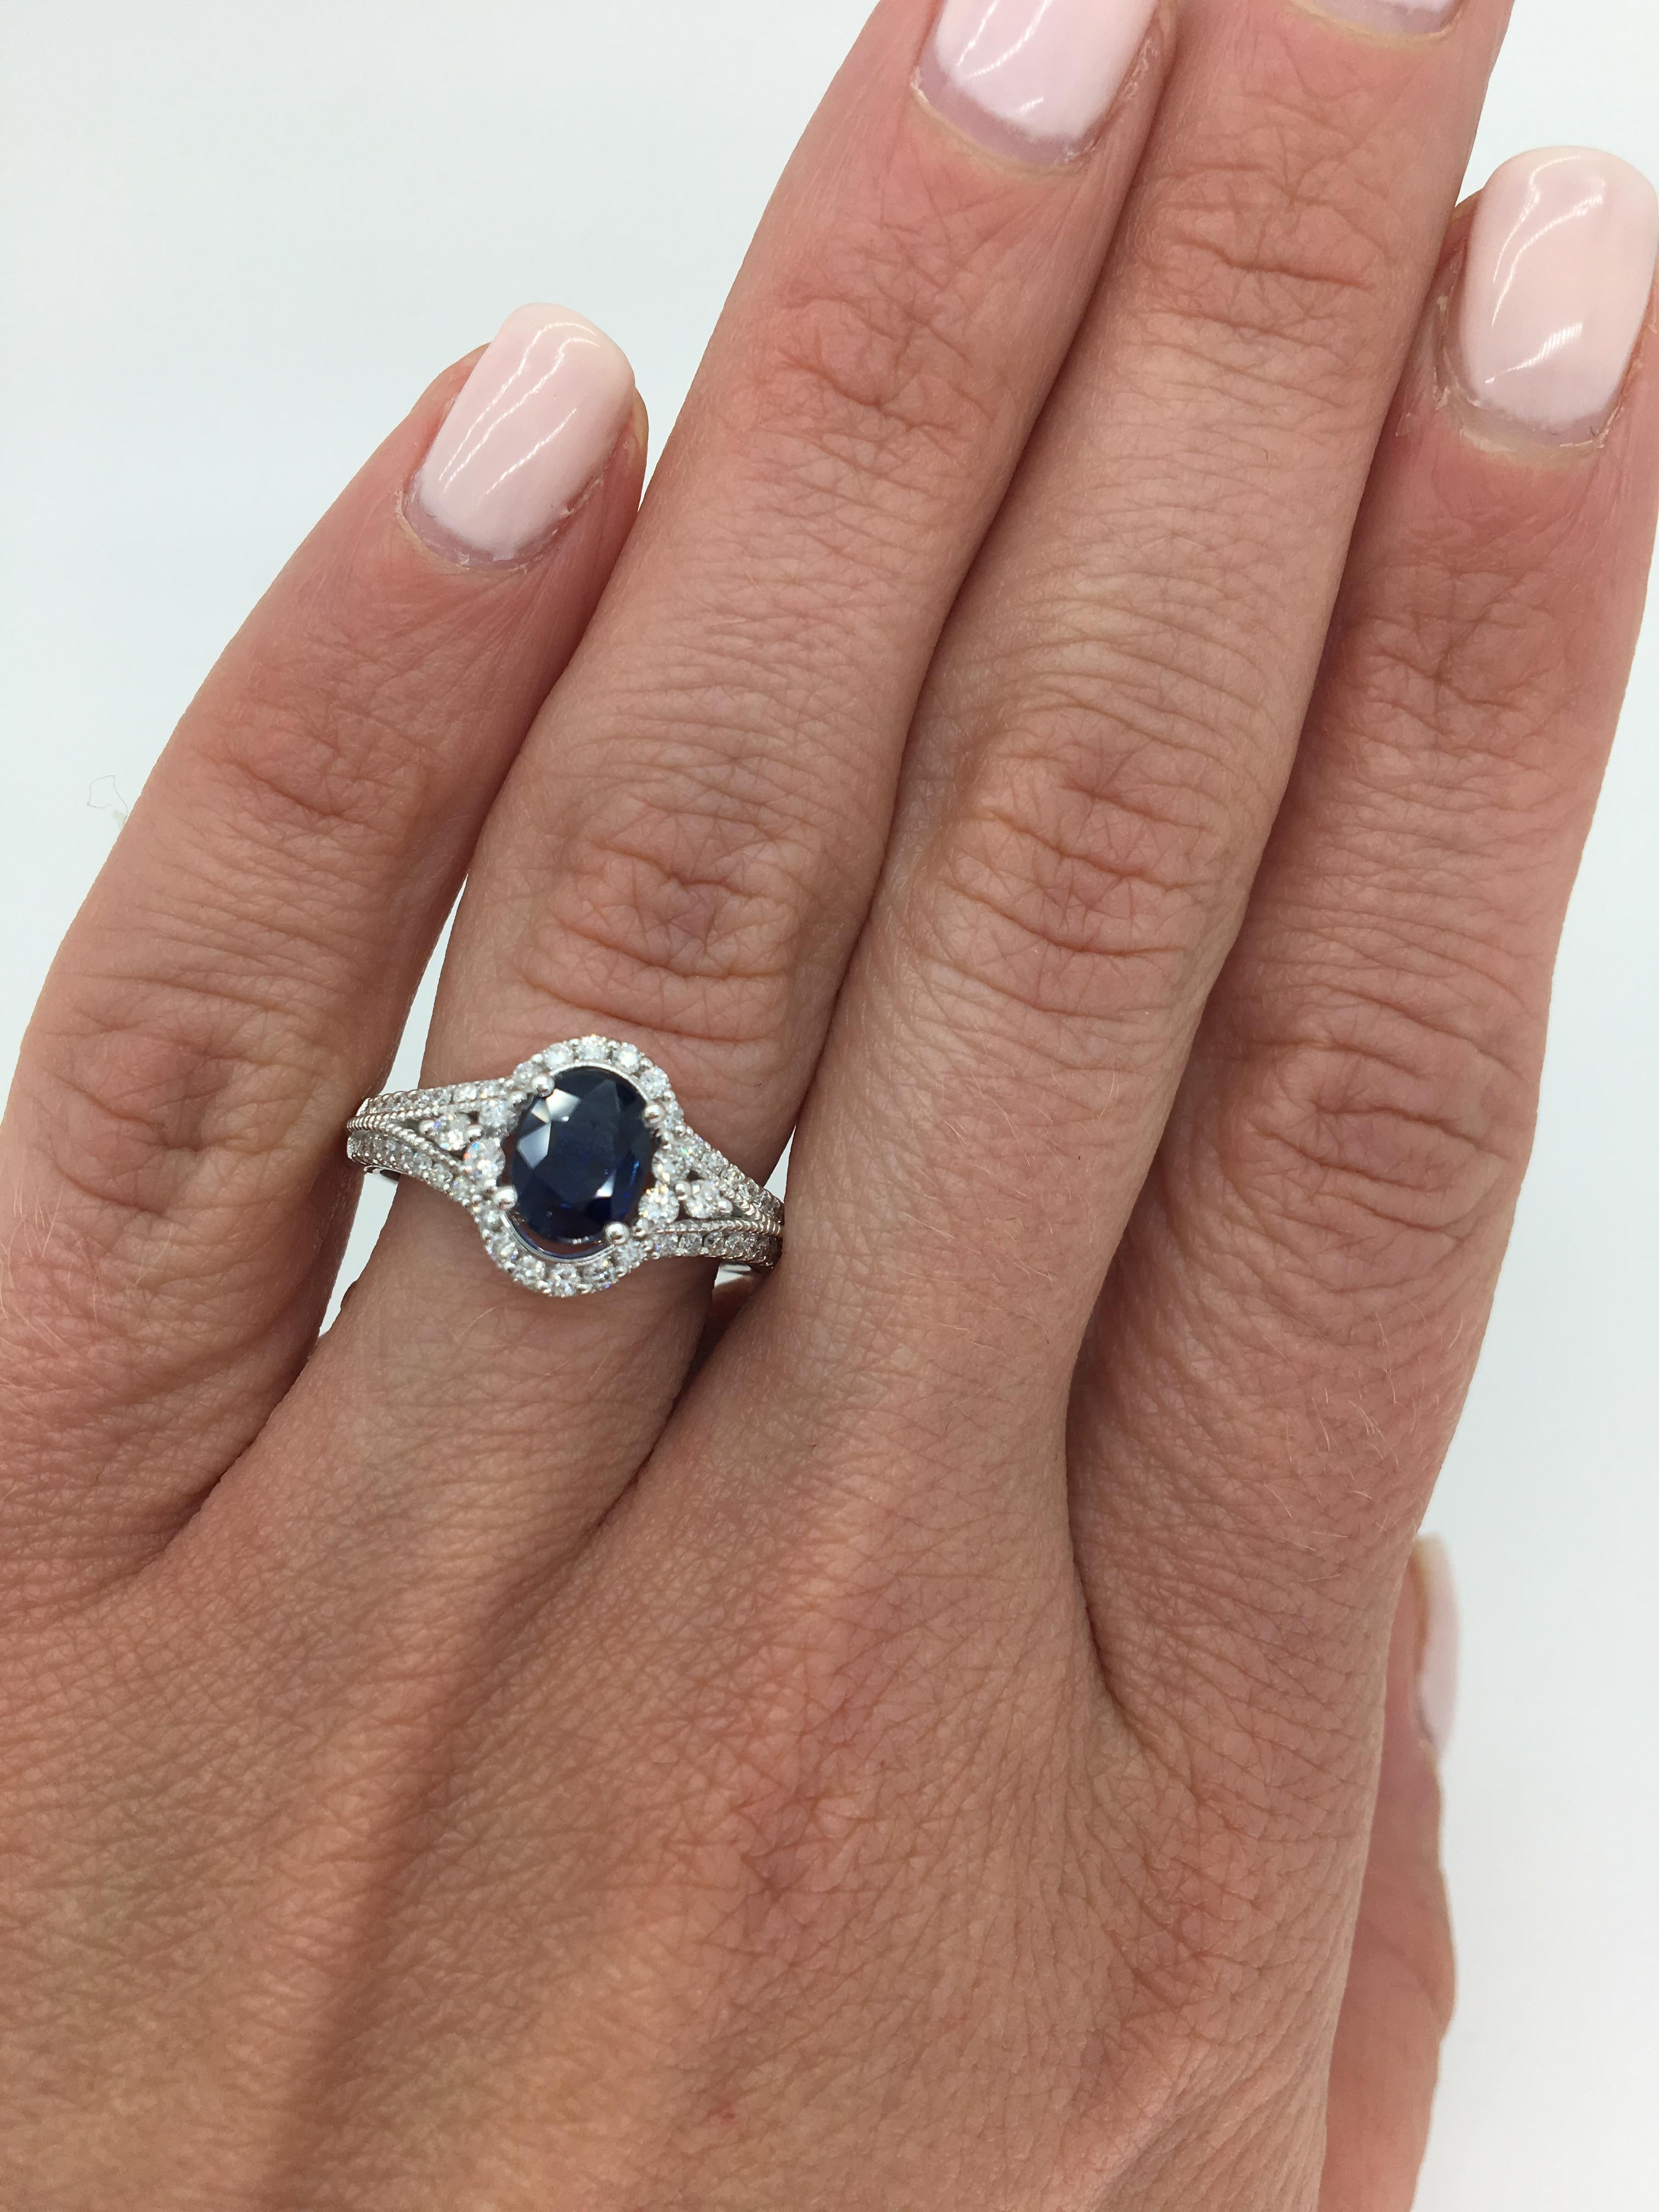 This stunning 1.12CT Blue Sapphire and Diamond ring has the perfect amount of elegance with its beautiful diamond halo and filigree detail.

 
Gemstone: Sapphire & Diamonds
Gemstone Carat Weight: 1.12CT Oval Cut Blue Sapphire
Diamond Carat Weight: